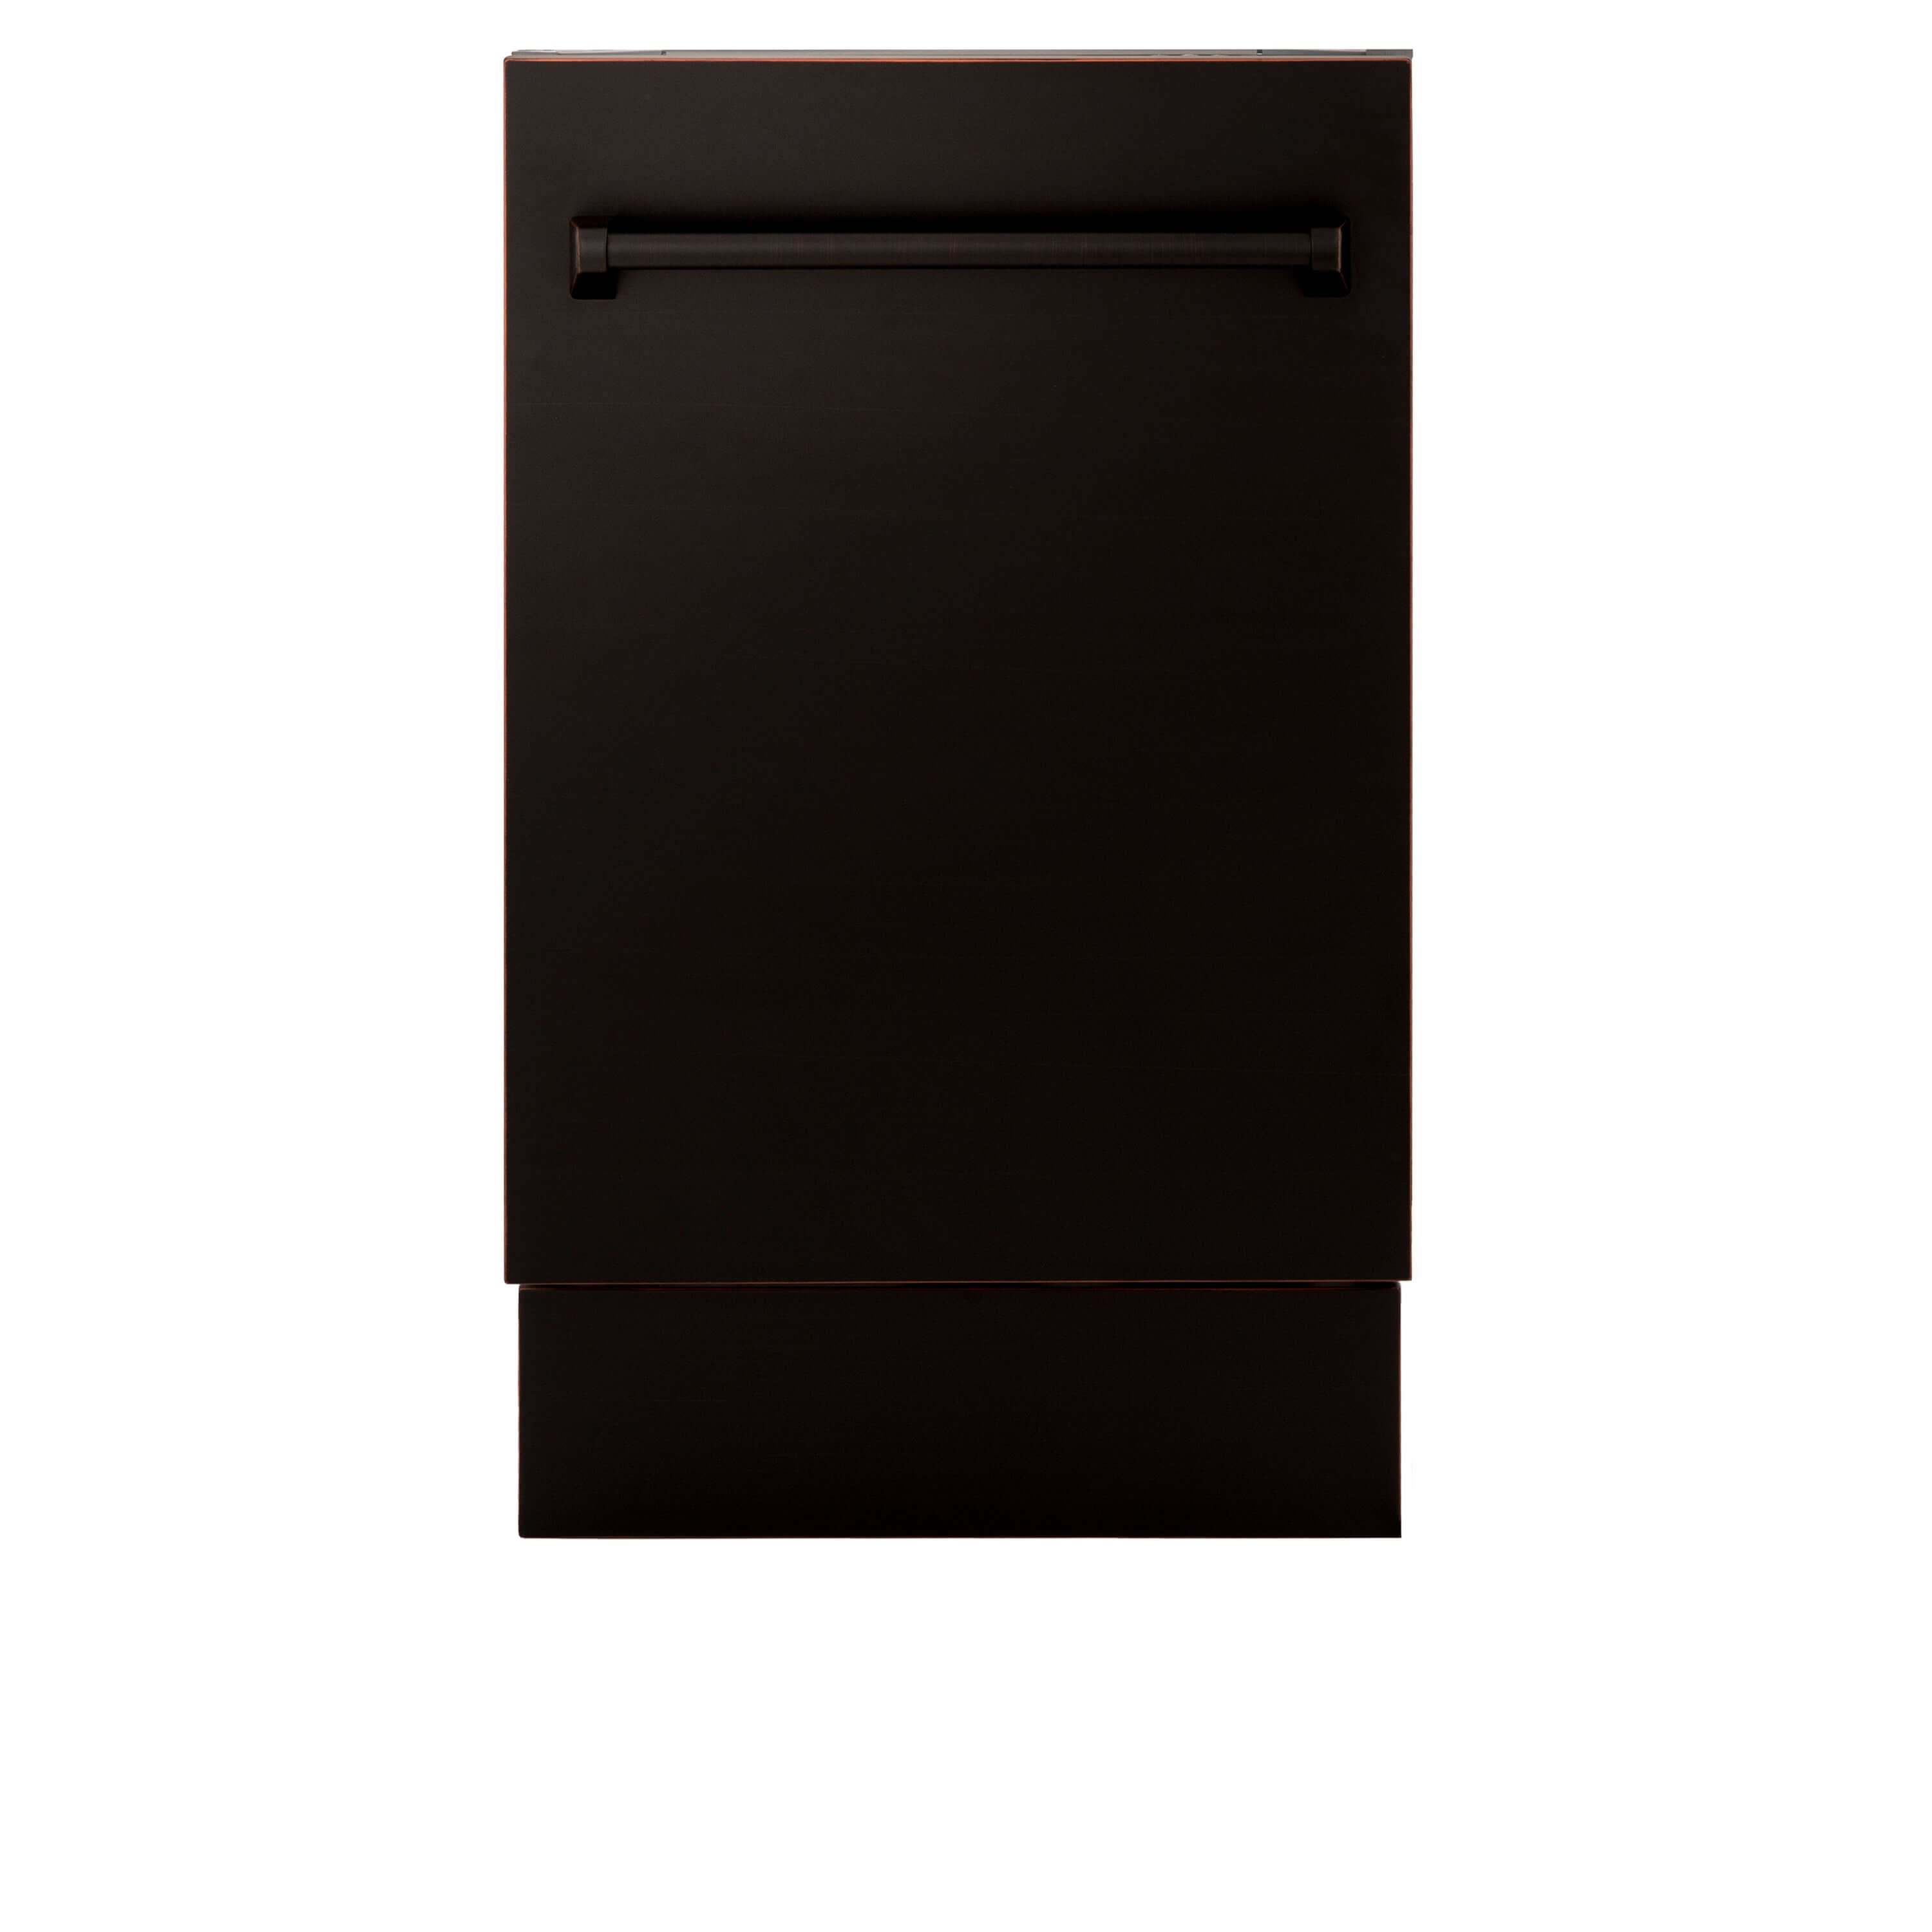 ZLINE 18 in. Tallac Series 3rd Rack Top Control Dishwasher in a Stainless Steel Tub with Oil-Rubbed Bronze Panel, 51dBa (DWV-ORB-18)